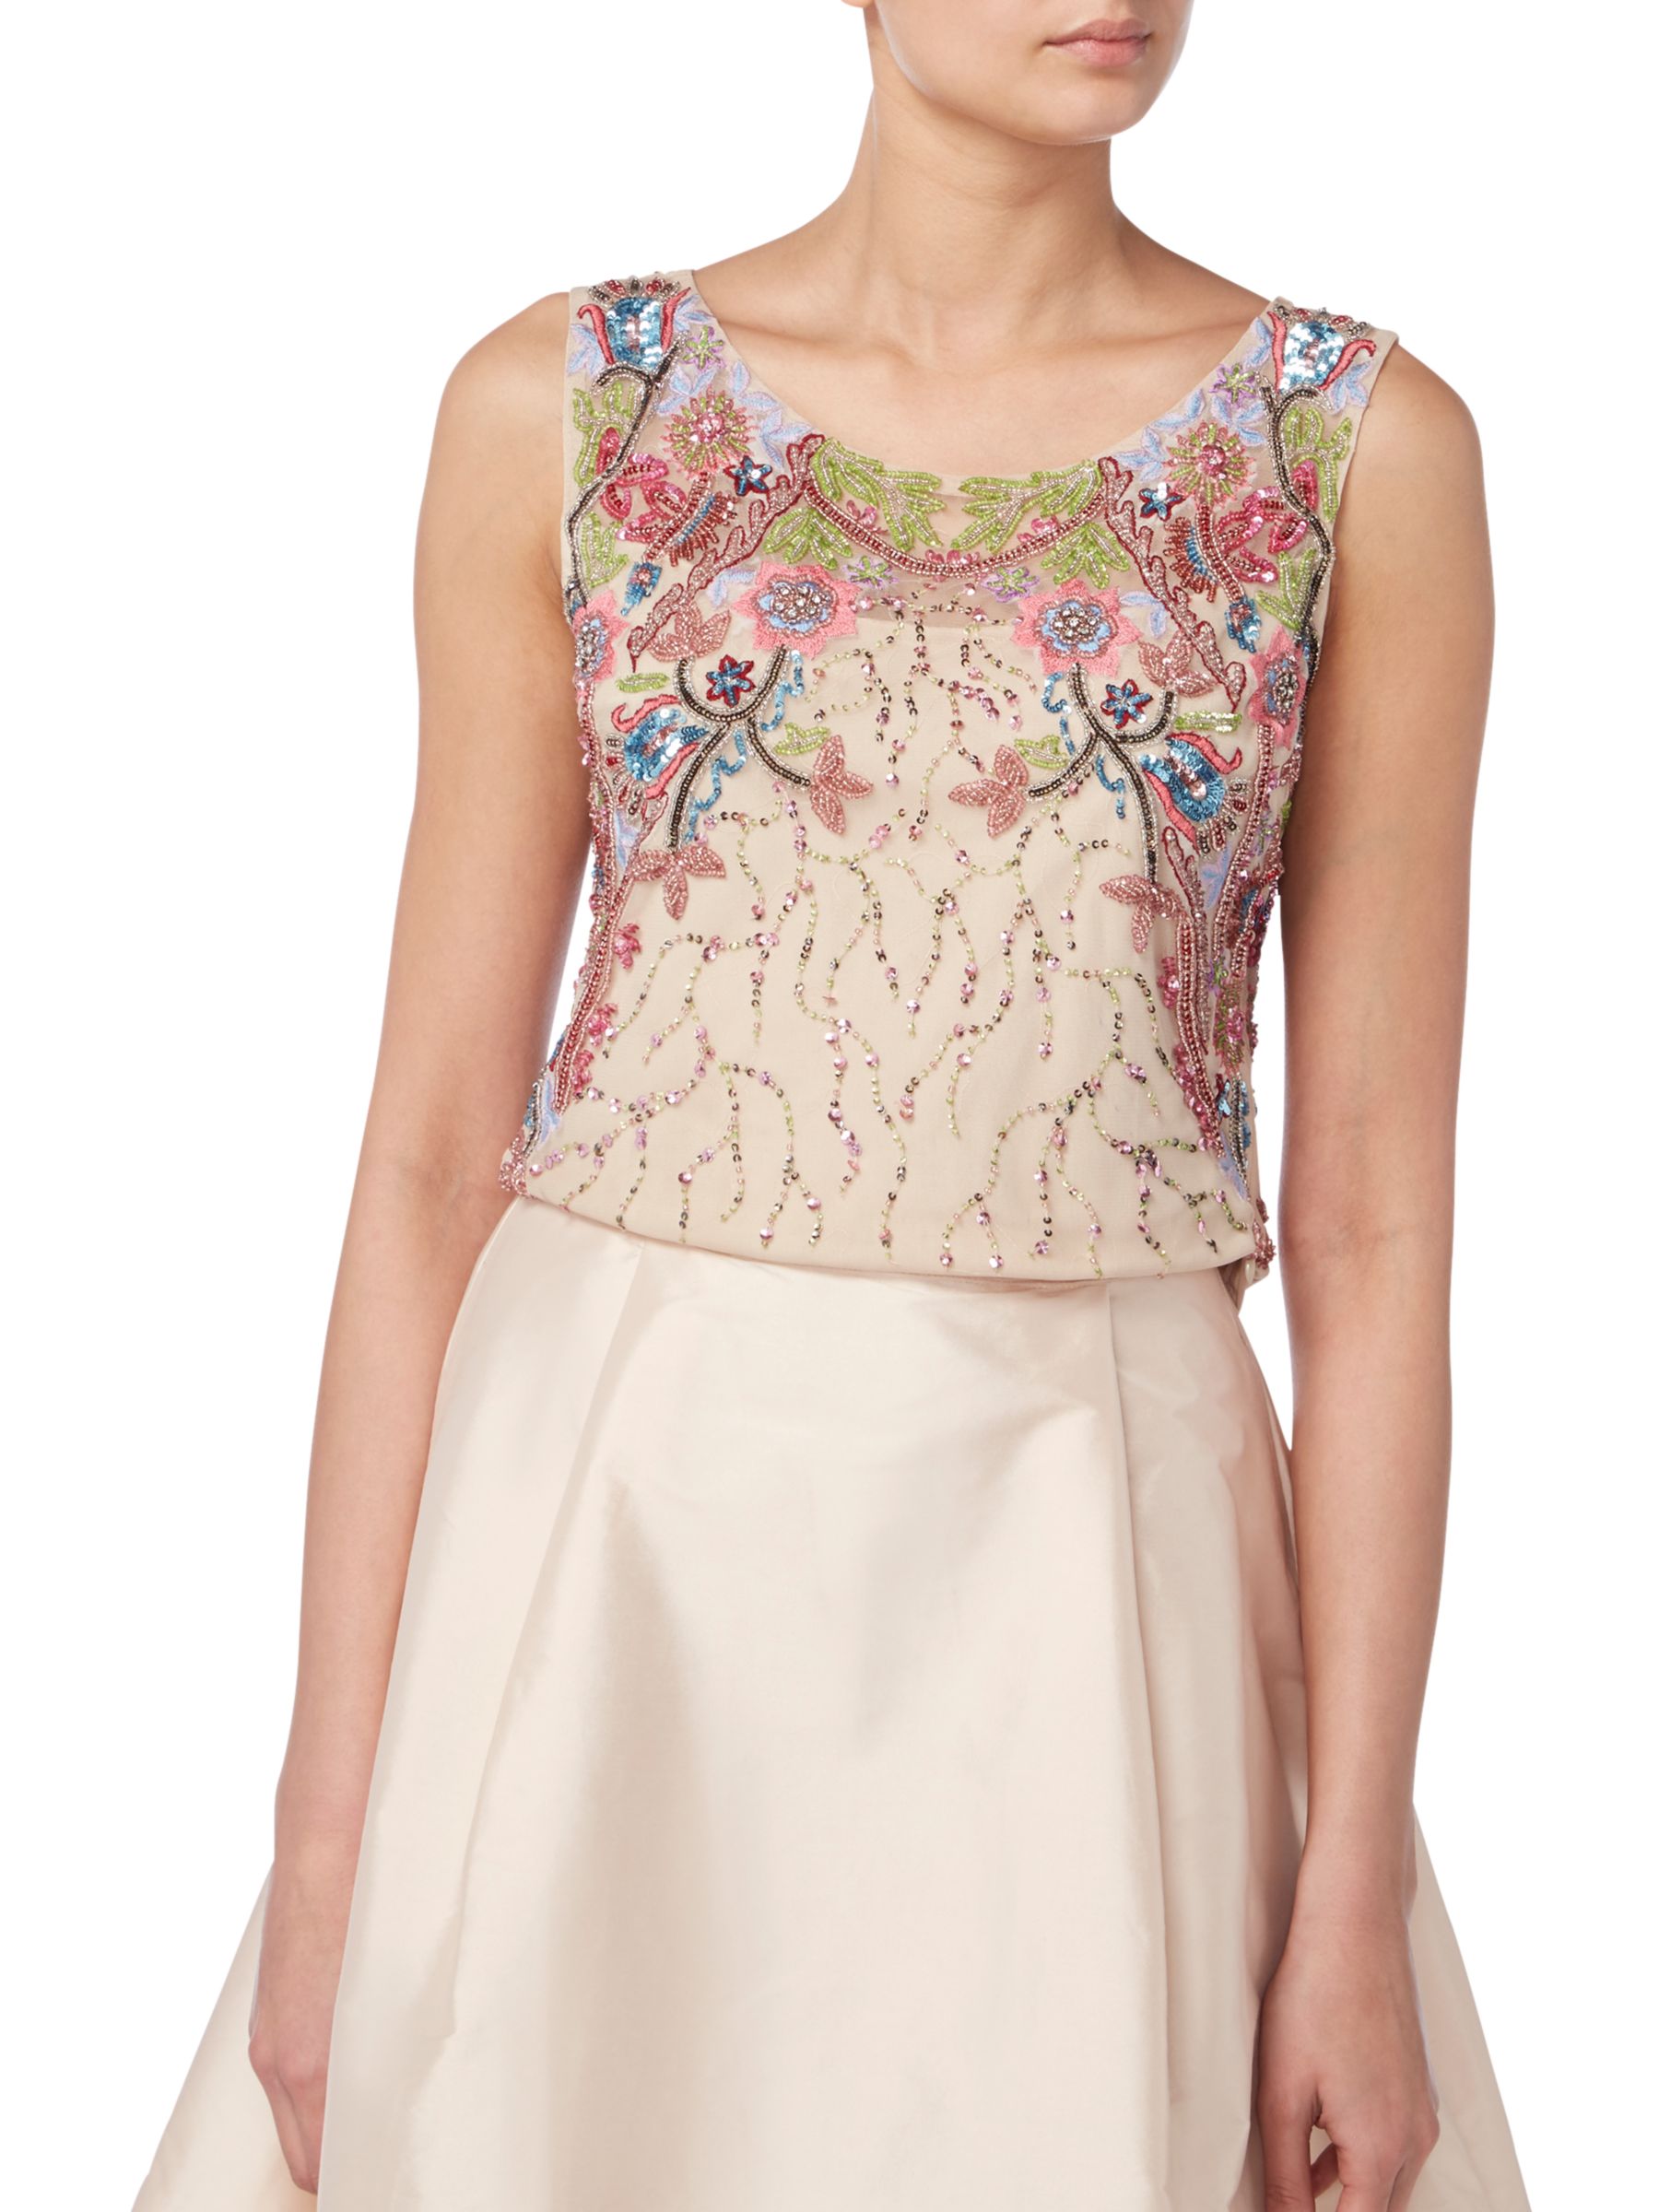 Raishma Floral Embroidered Top, Nude